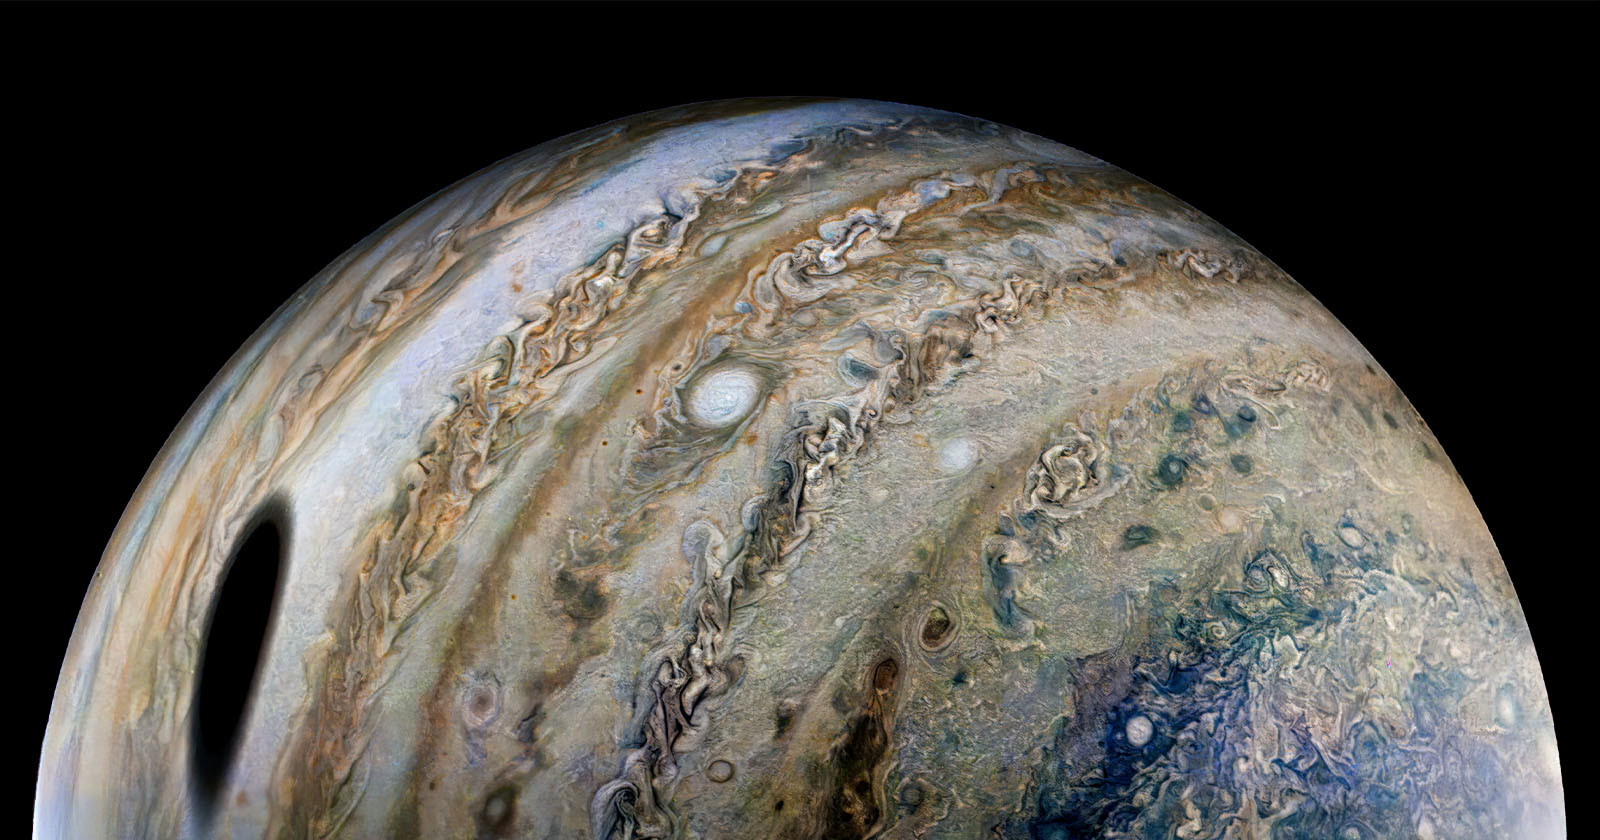 NASA Wants Your Help Analyzing the Juno Probes Photos of Jupiter